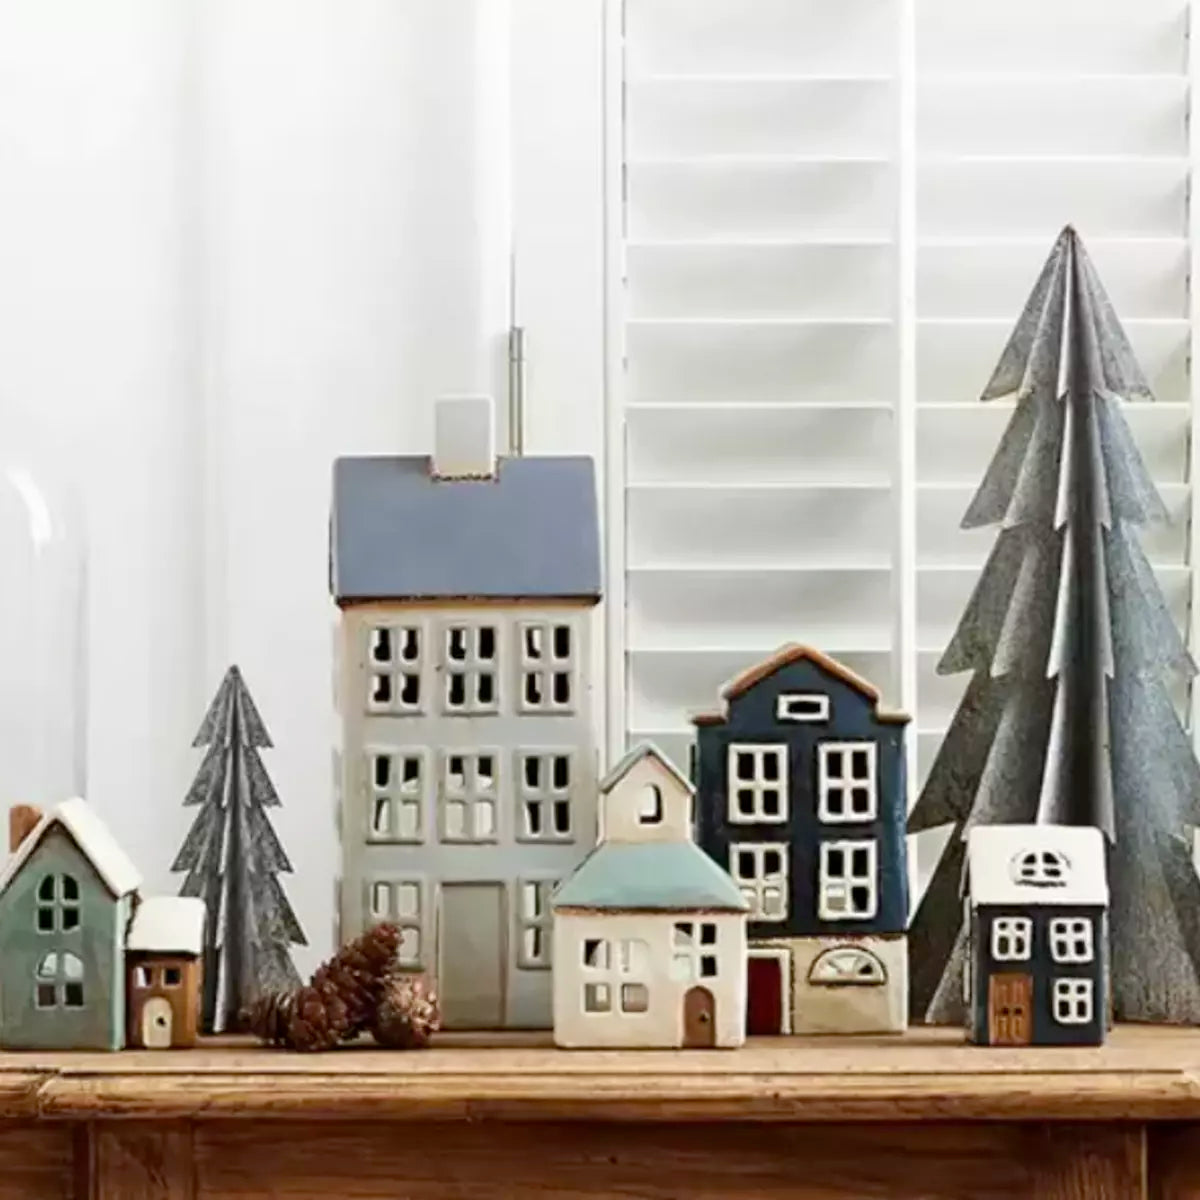 French Country Collections' A Christmas Village Mini Church tea light holder mimics a charming Christmas Village, with small wooden houses nestled on a mantle alongside pine trees.